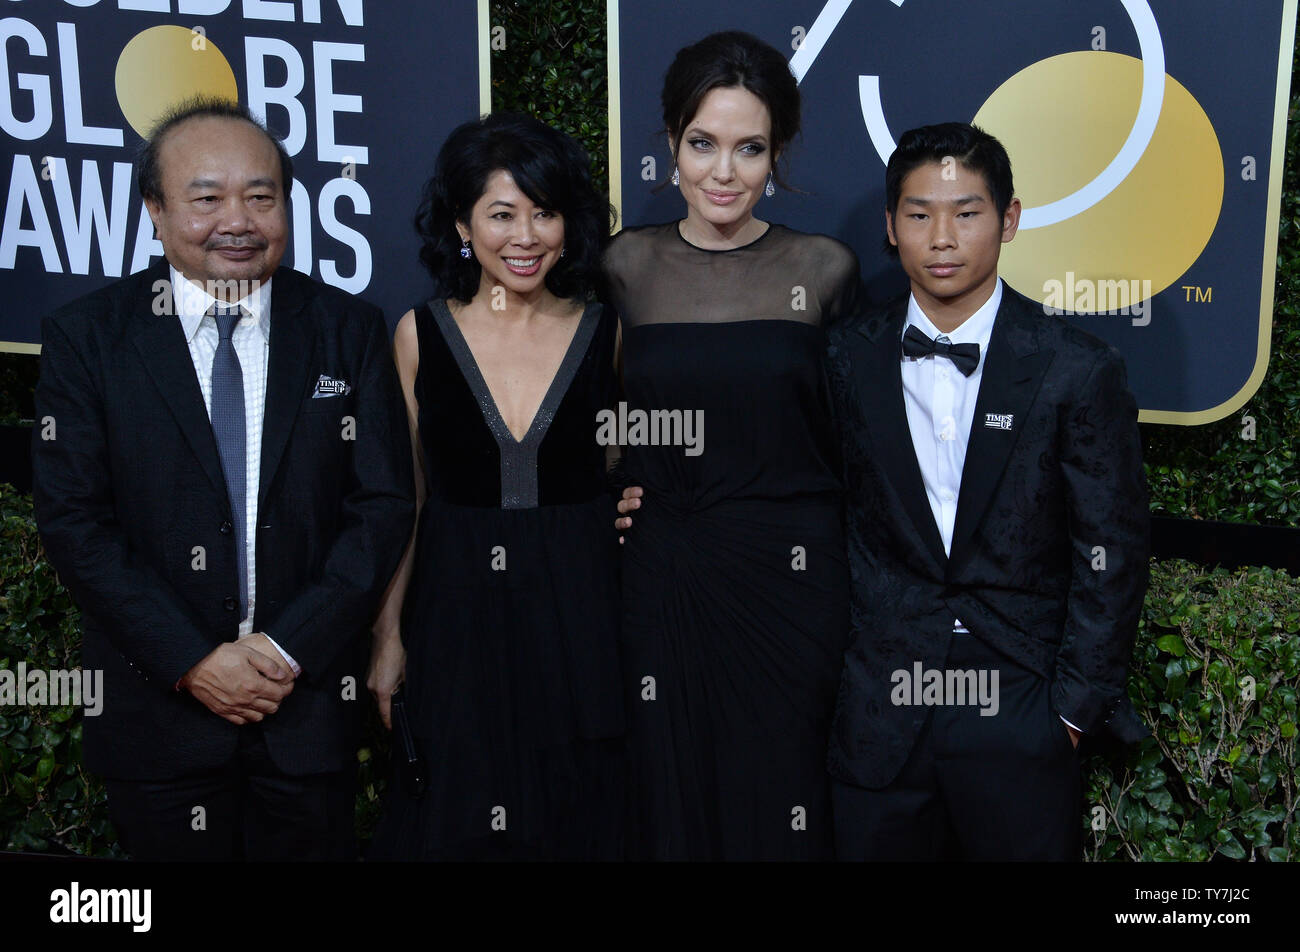 Filmmaker Rithy Panh, activist Loung Ung, actor/director Angelina Jolie and Pax Thien Jolie-Pitt  attend the 75th annual Golden Globe Awards at the Beverly Hilton Hotel in Beverly Hills, California on January 7, 2018. Photo by Jim Ruymen/UPI Stock Photo